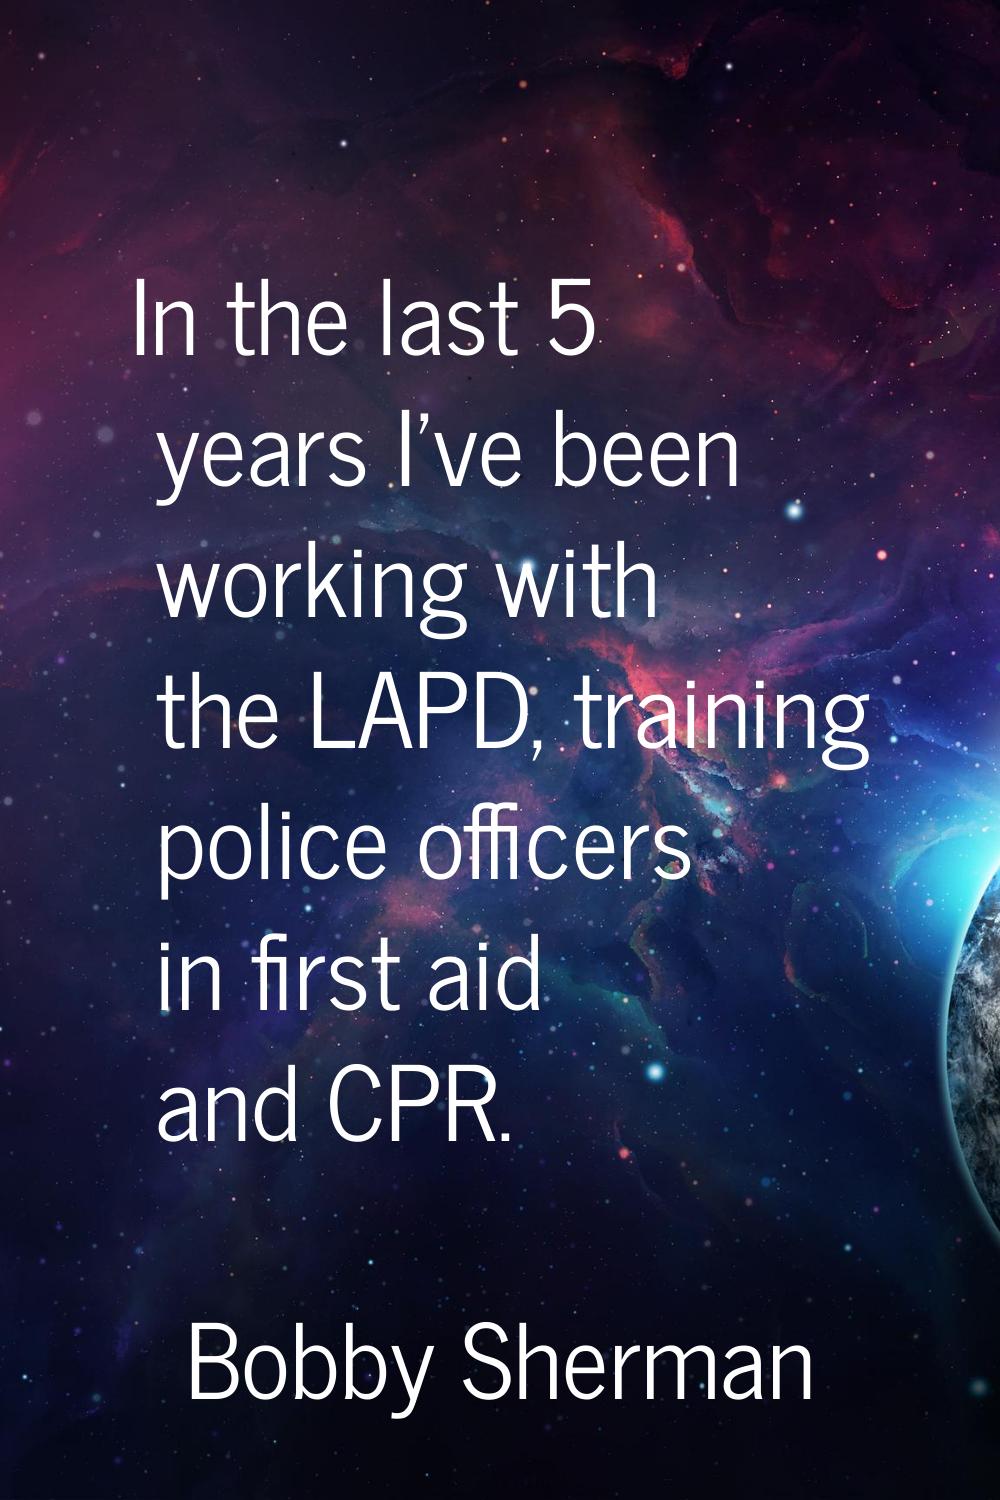 In the last 5 years I've been working with the LAPD, training police officers in first aid and CPR.